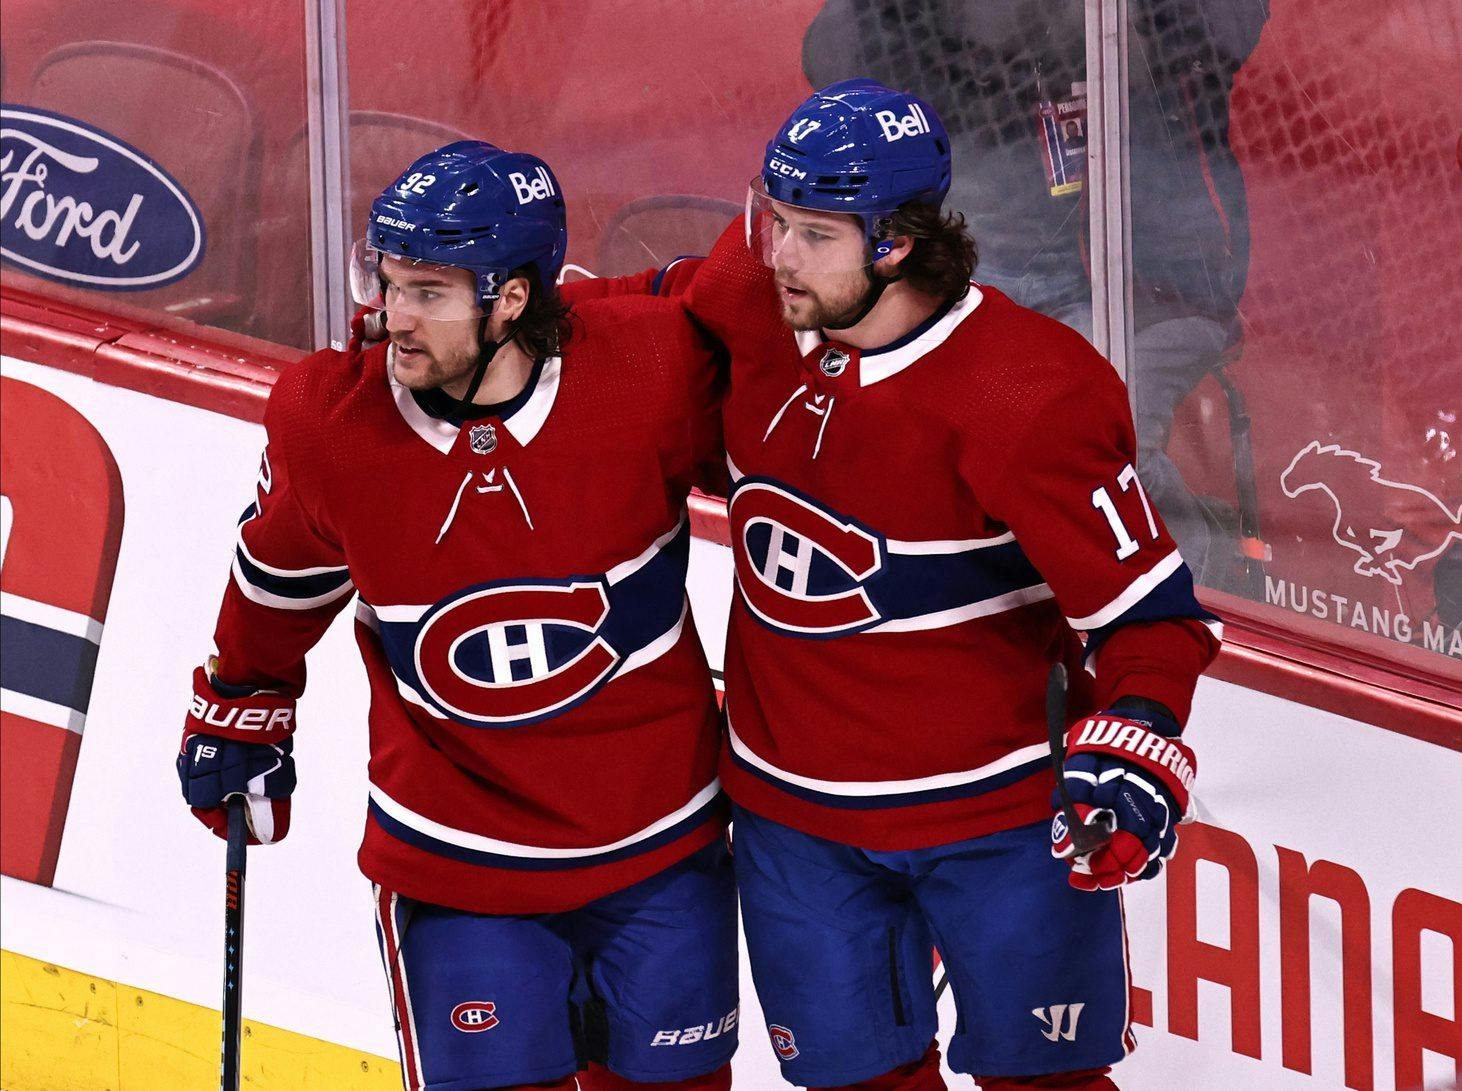 The Montreal Canadiens could get creative at the NHL Trade Deadline